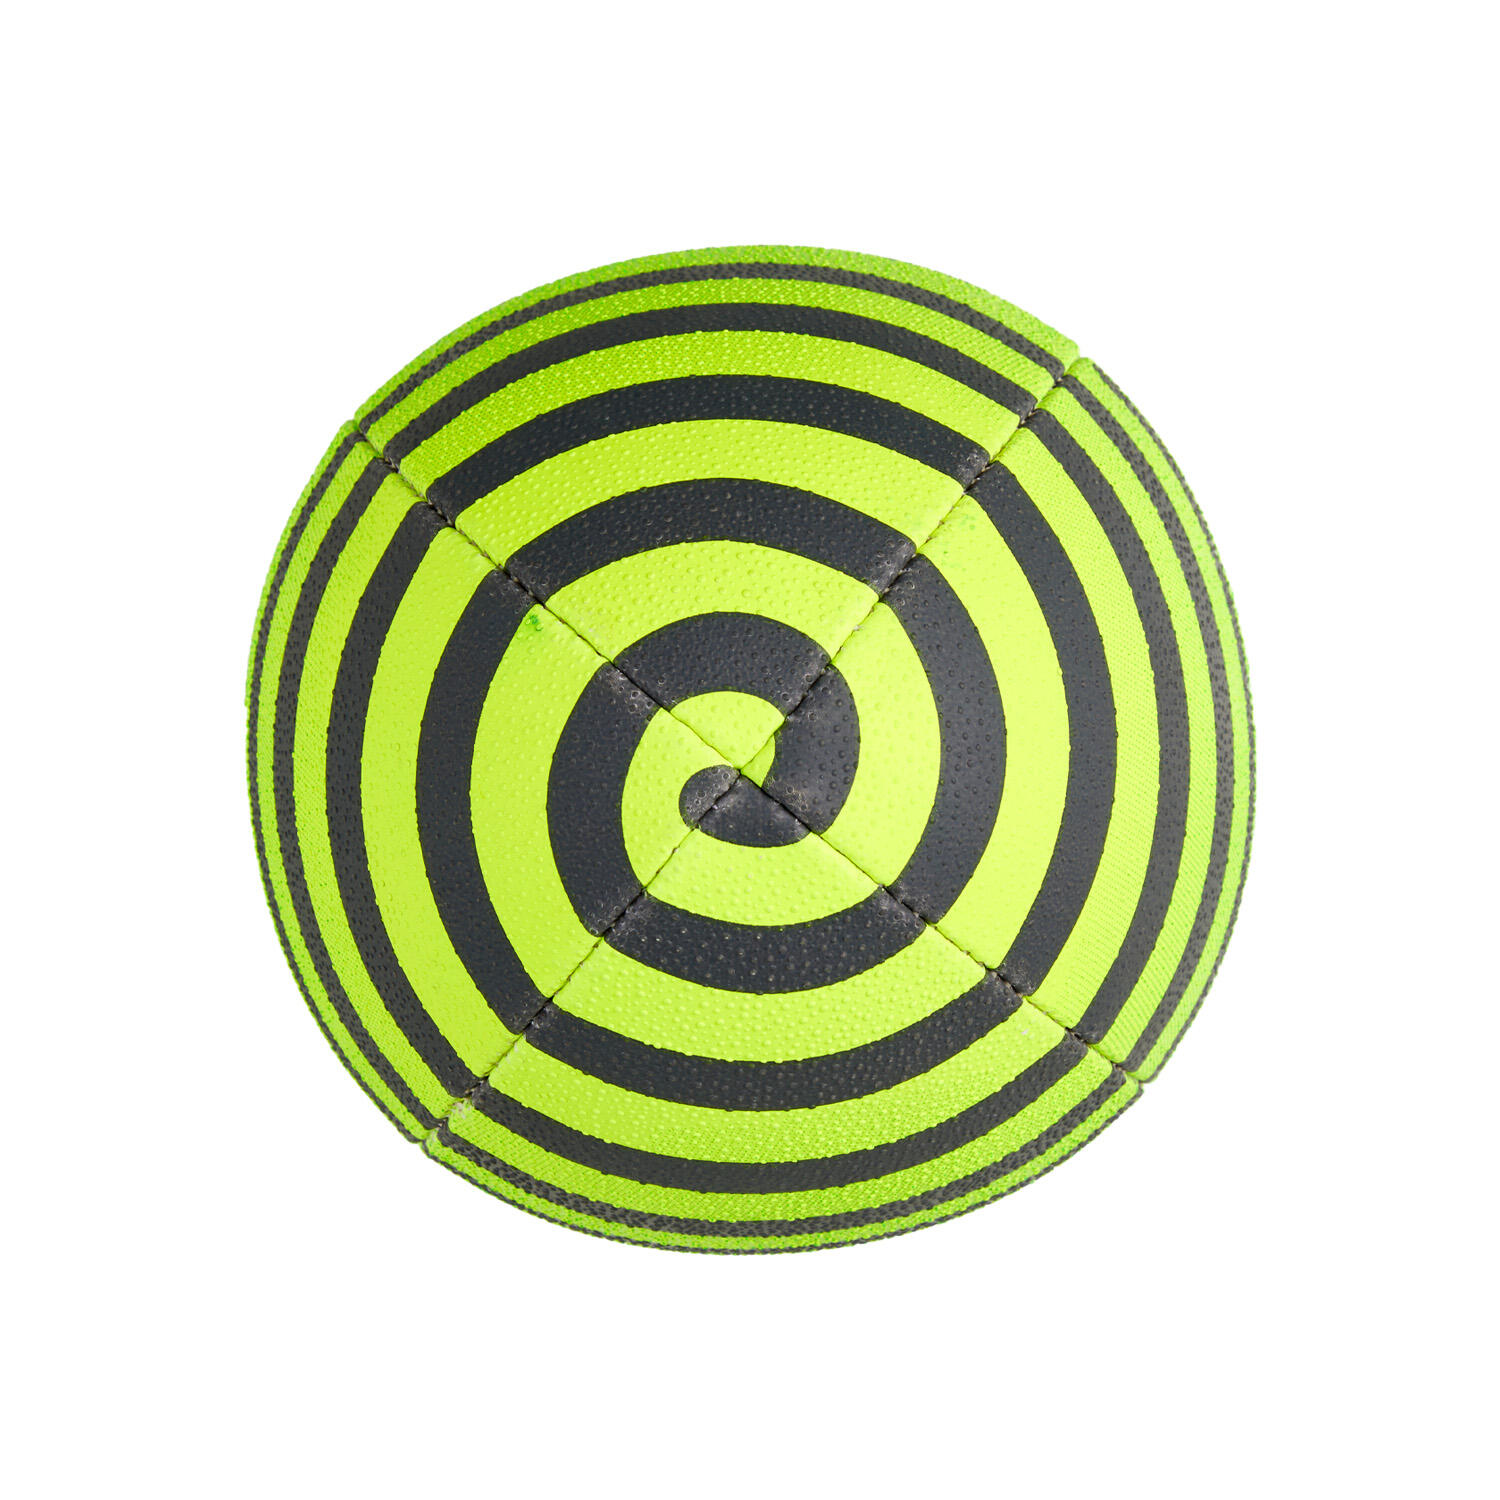 Ram Rugby Ball - Squad - Trainer - (Size 4) - Spiral 4/6